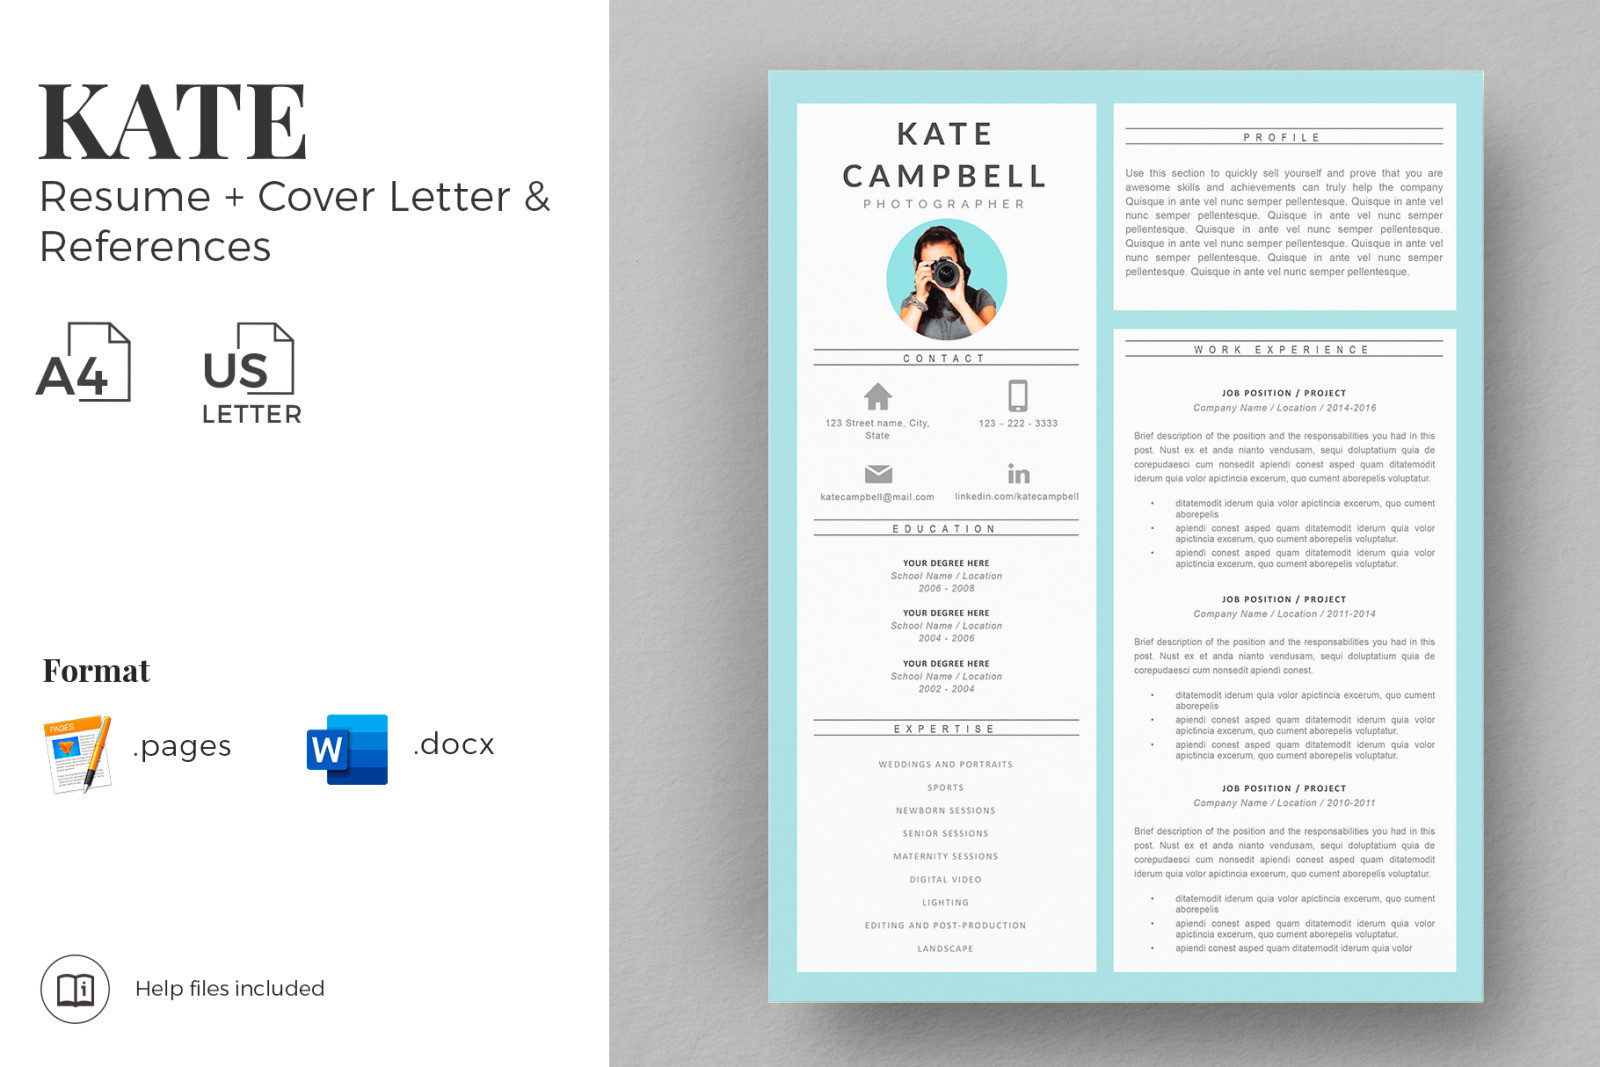 Free Creative Resume and Cover Letter Templates Creative Resume, Cv Design & Matching Cover Letter   References …